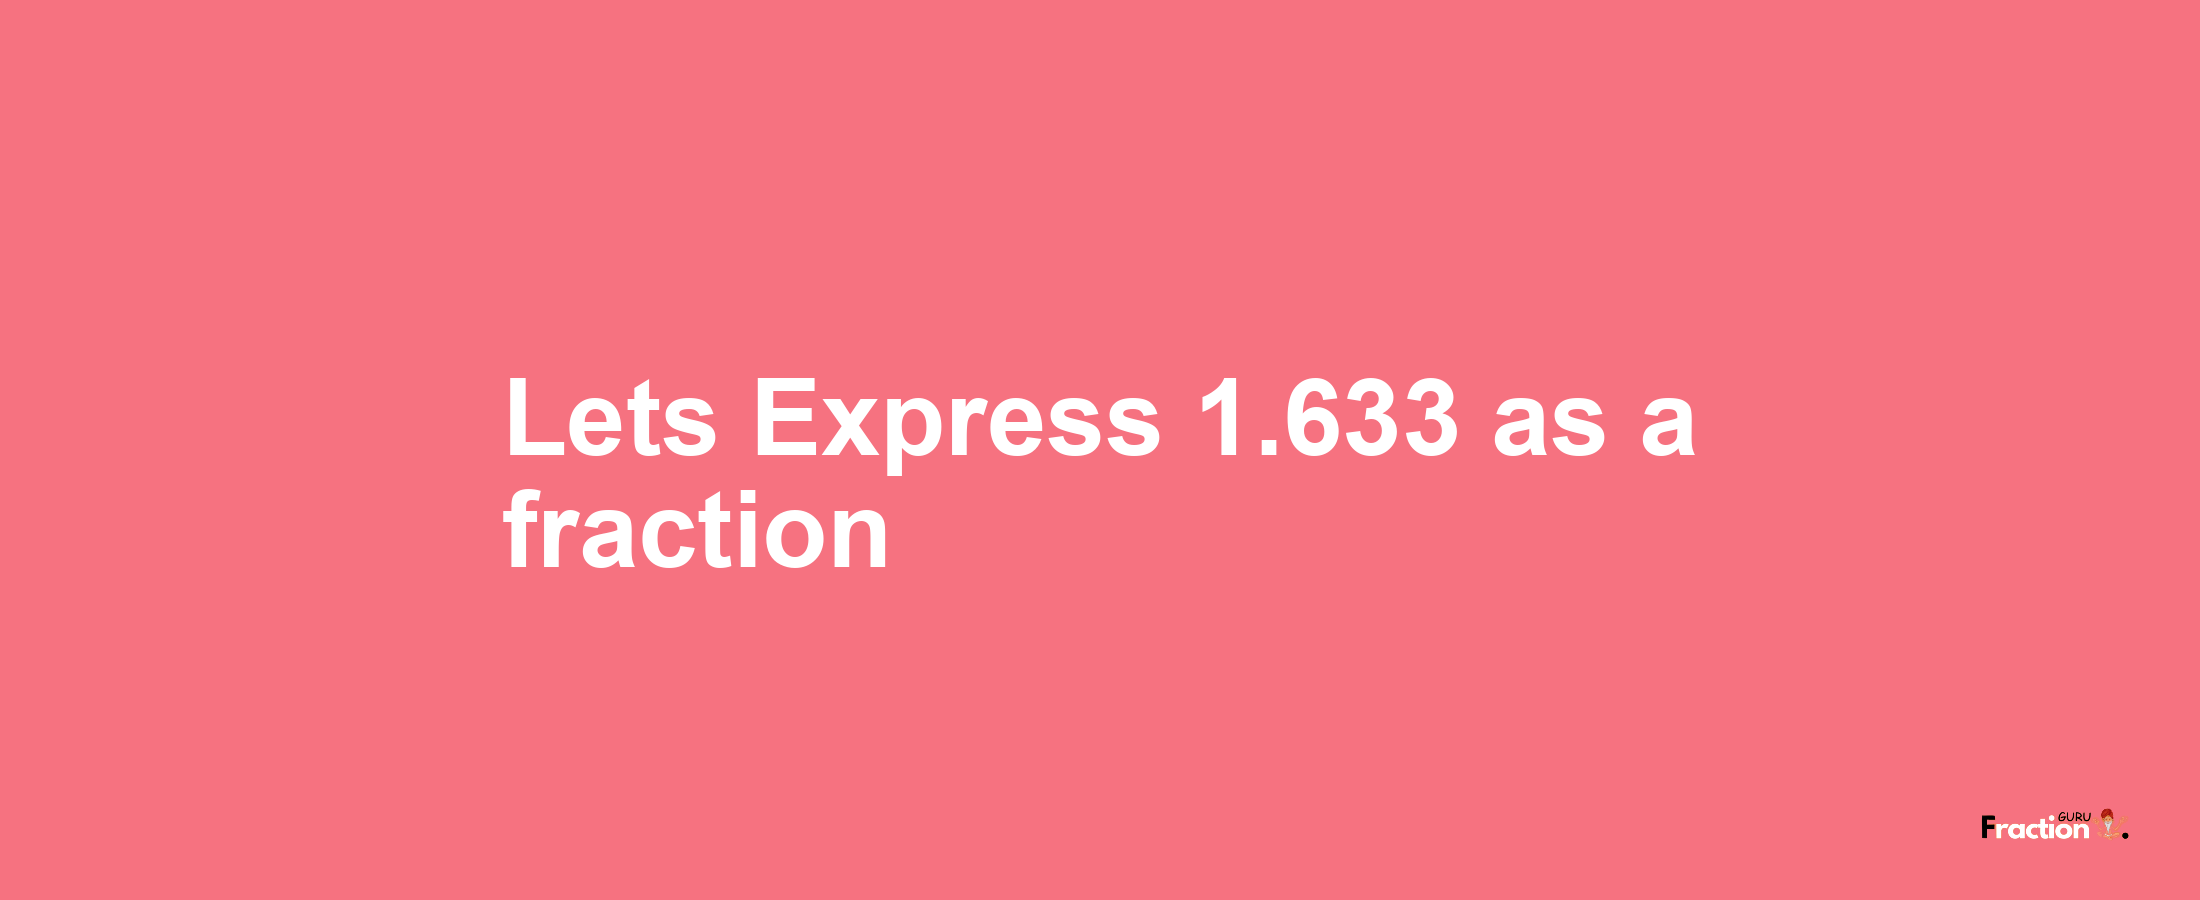 Lets Express 1.633 as afraction